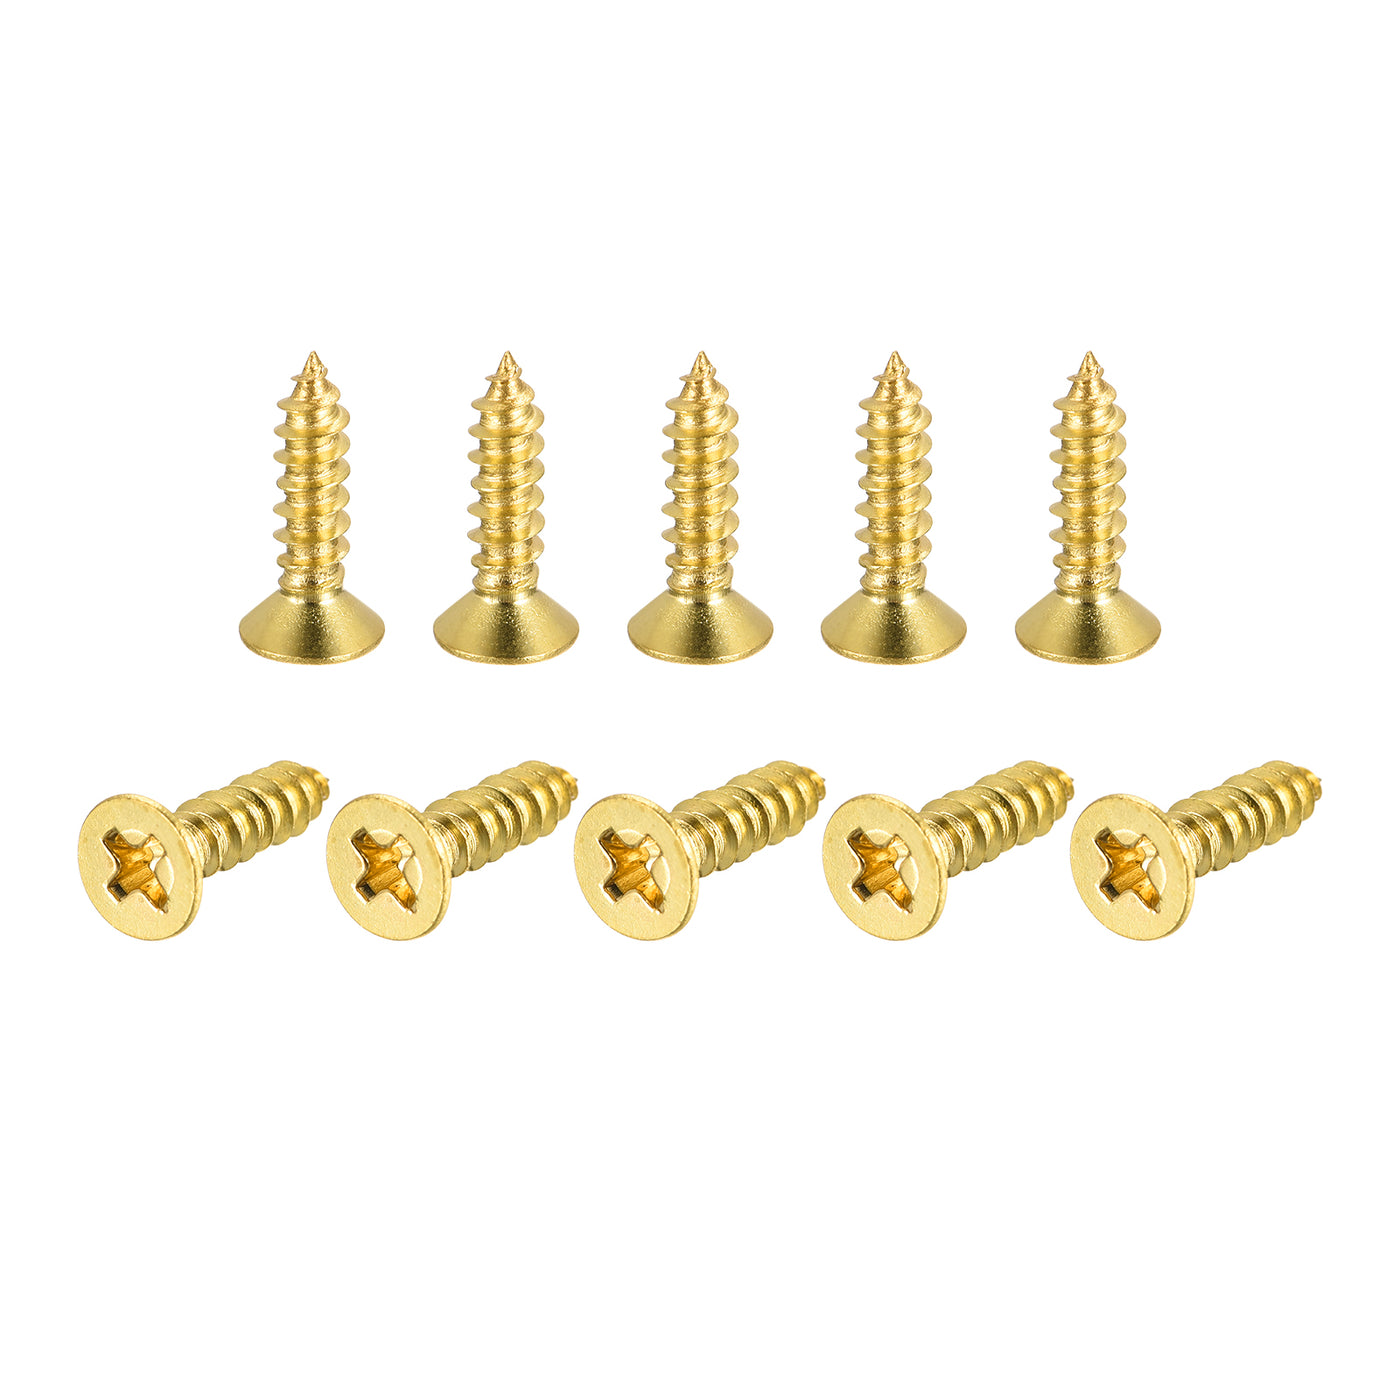 uxcell Uxcell Brass Wood Screws, M4x16mm Phillips Flat Head Self Tapping Connector for Door, Cabinet, Wooden Furniture 25Pcs